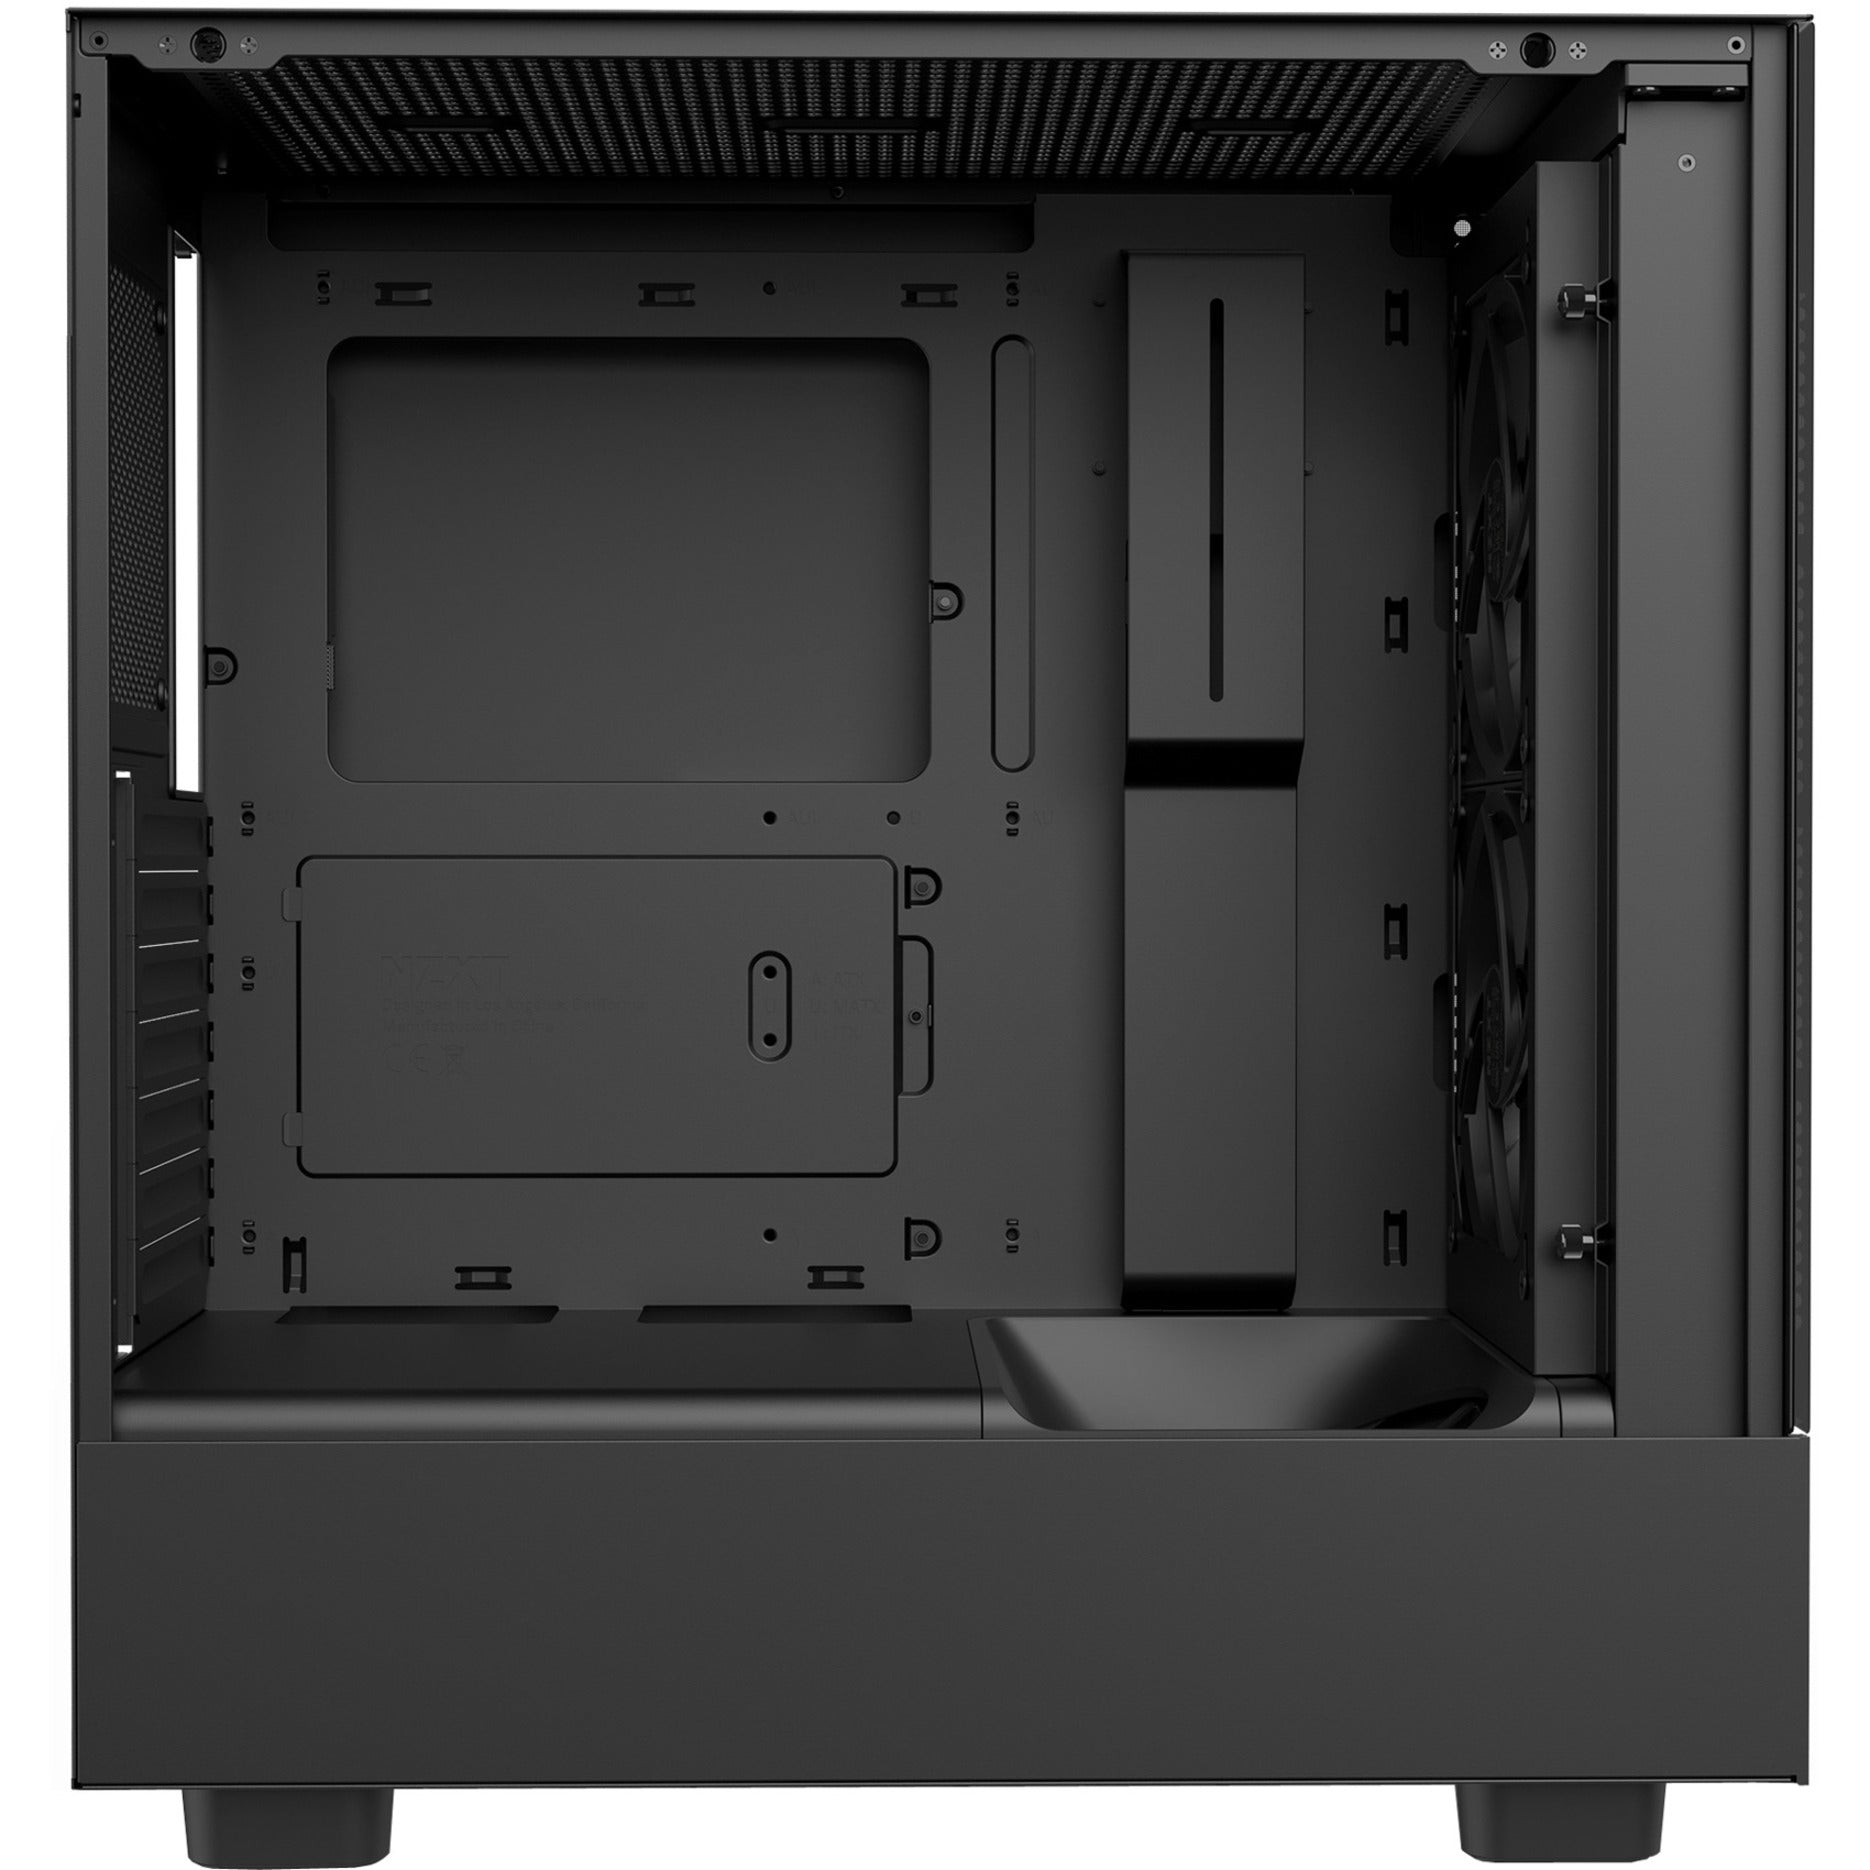 NZXT CC-H51EB-01 H5 Elite Premium Compact Mid-Tower Case, Gaming Computer Case with Tempered Glass, Black